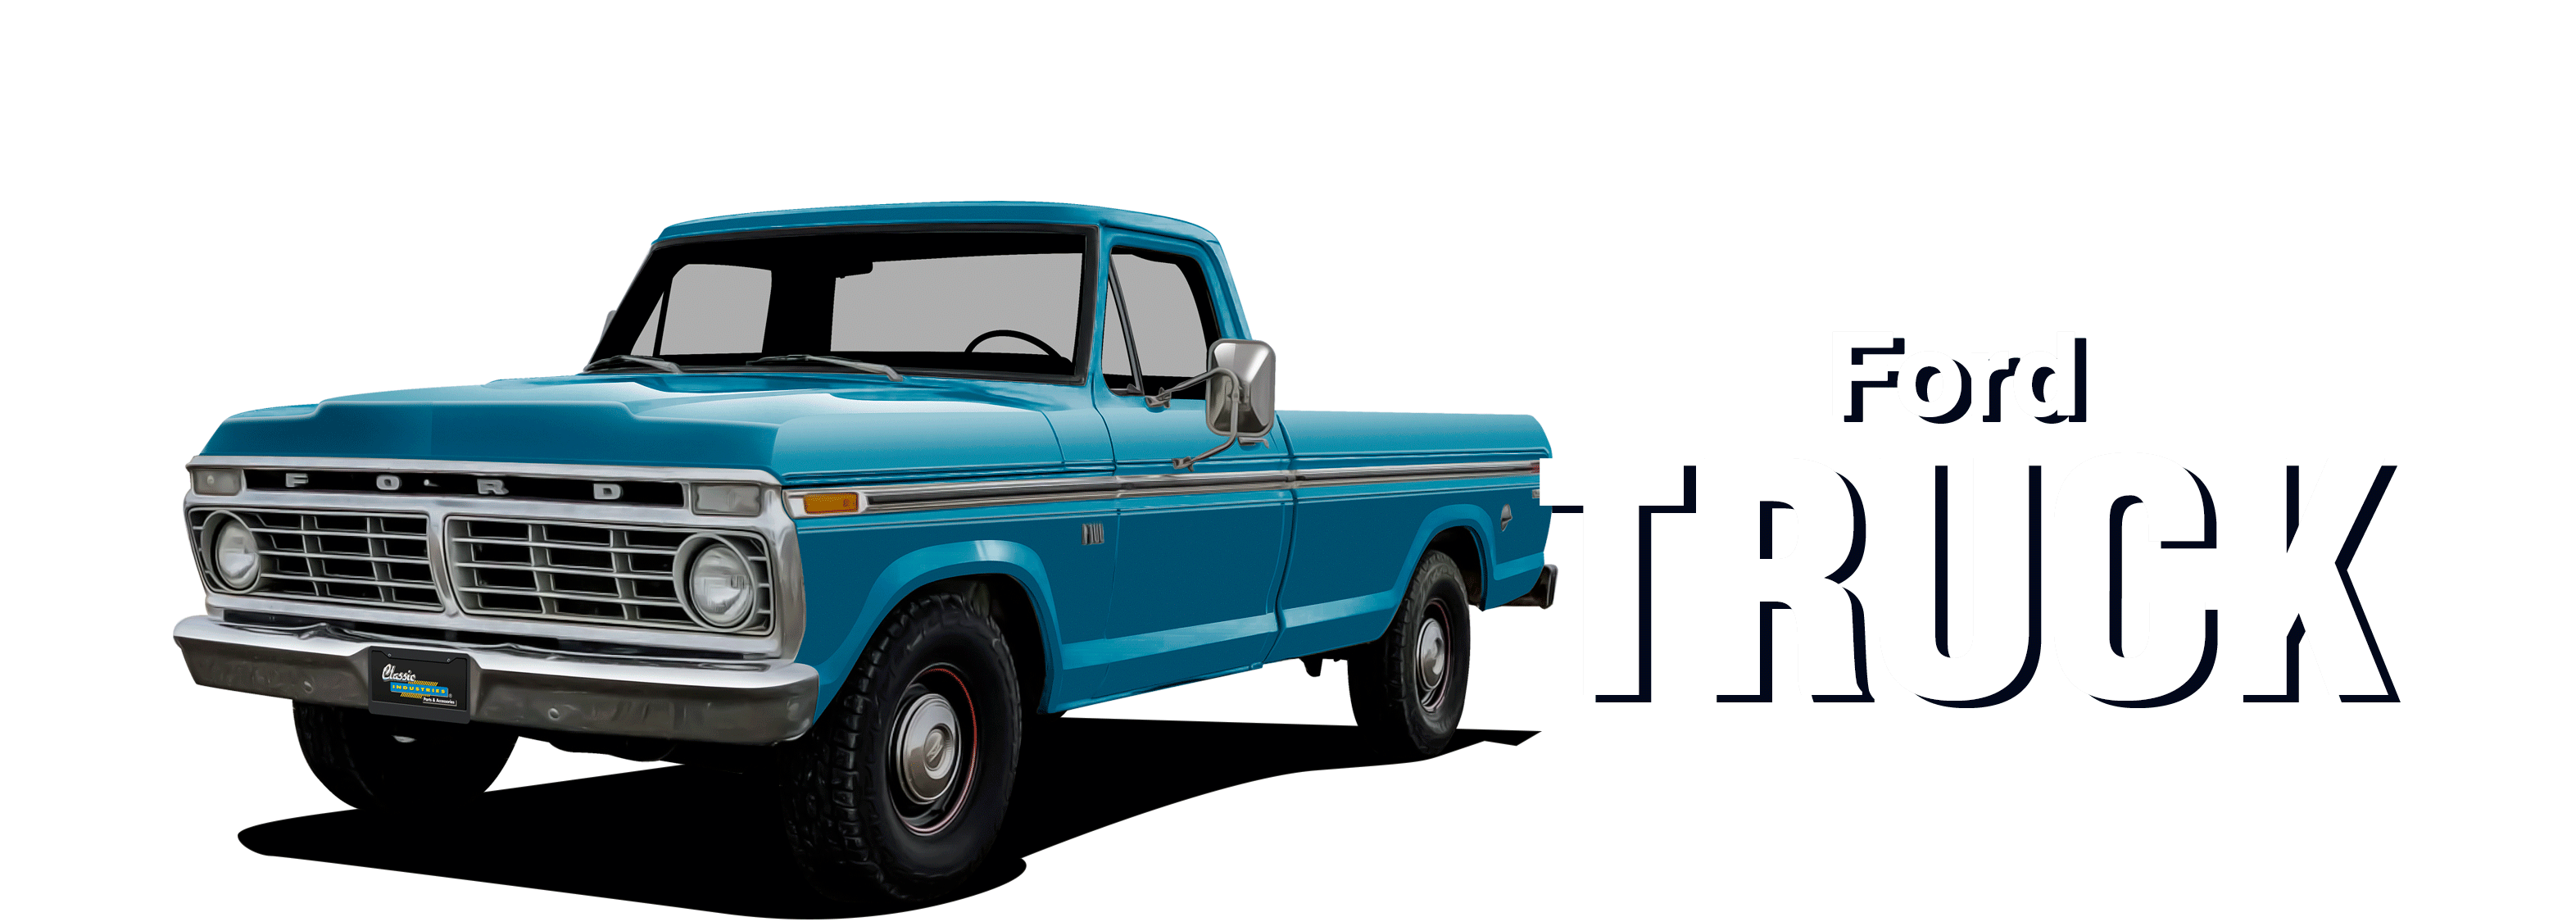 1973-1979 Ford Truck Parts and Accessories